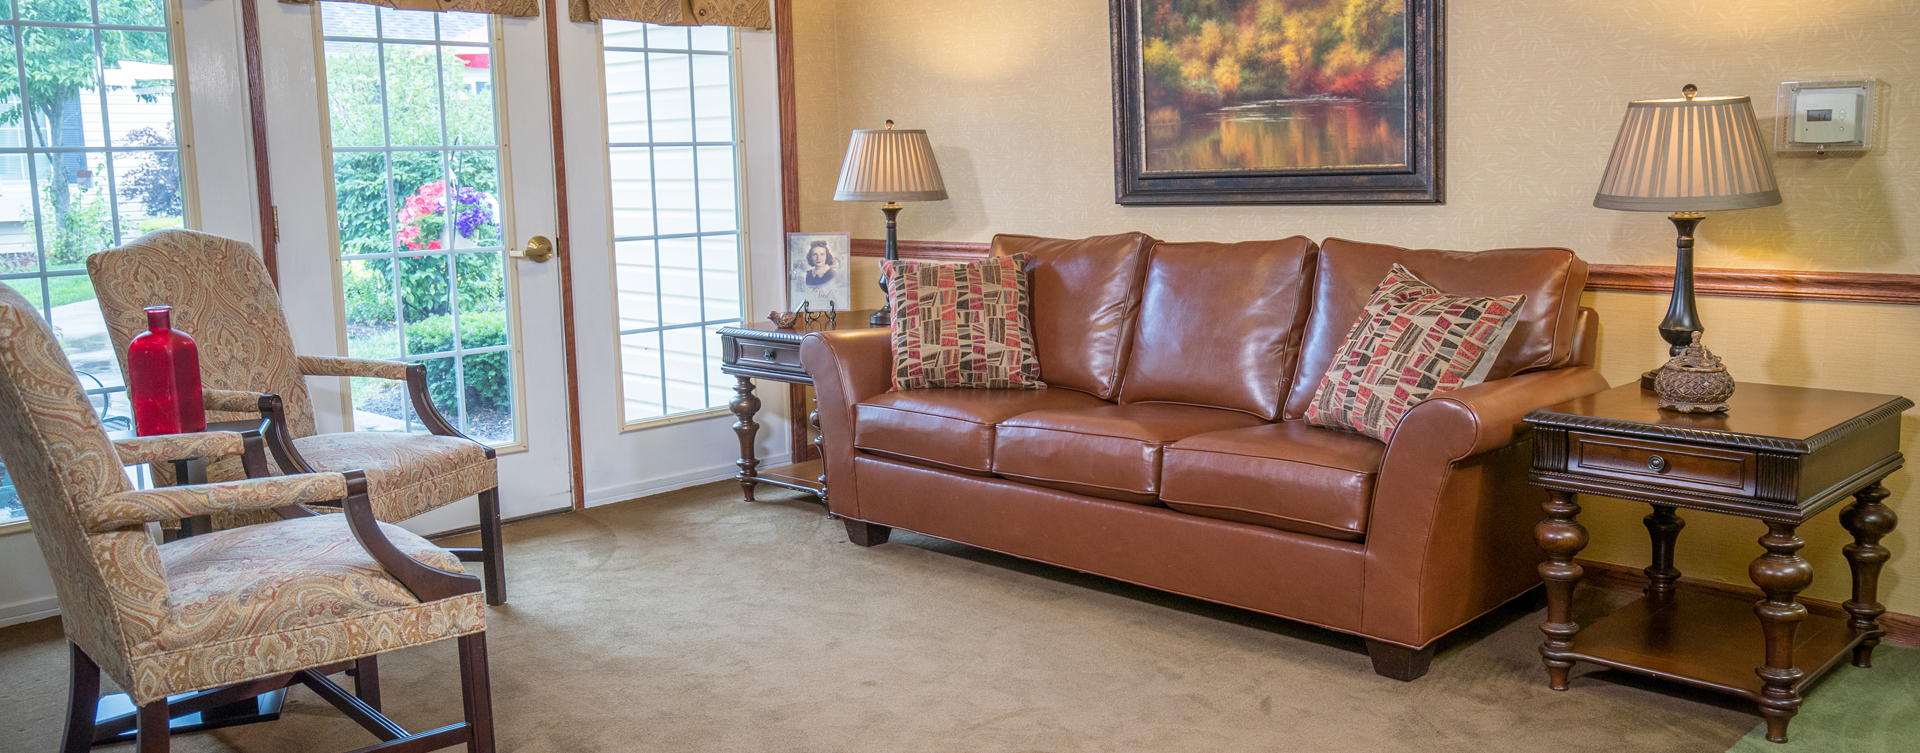 Enjoy a good snooze in the sitting area at Bickford of Quincy